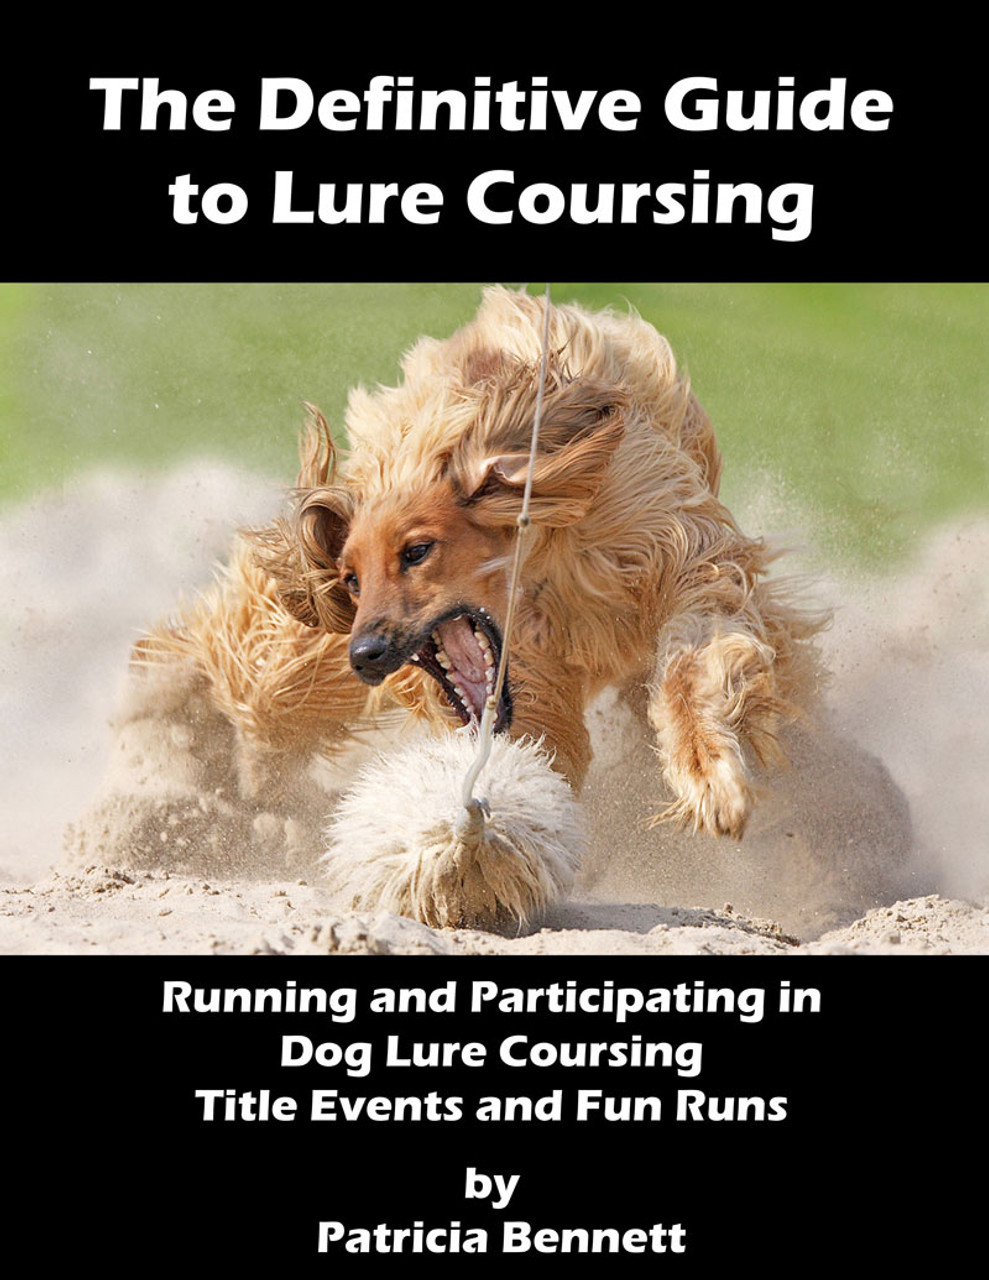 The Beginners Guide to Lure Coursing for Dogs - Puppy Leaks